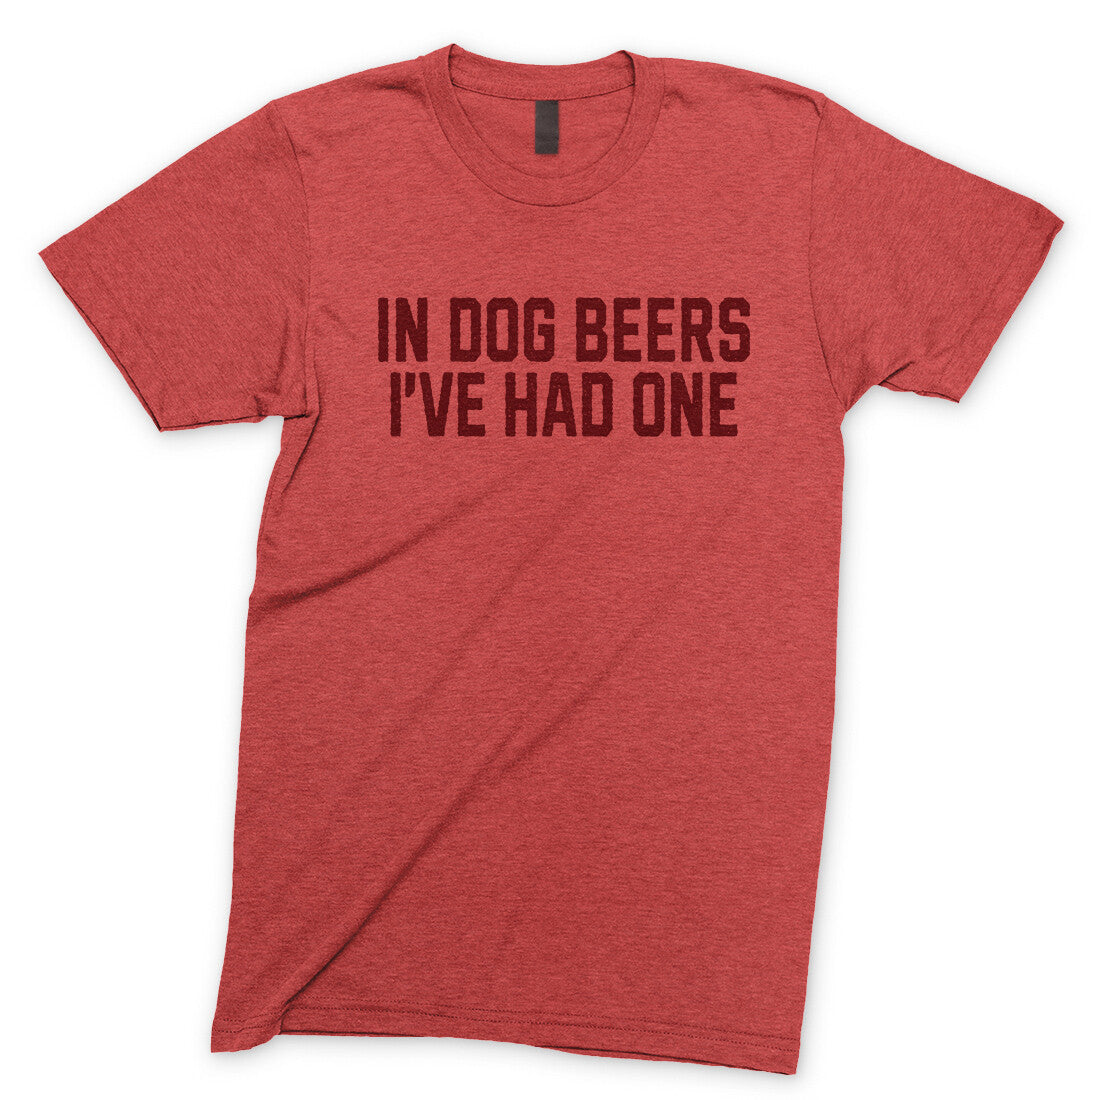 In Dog Beers I've Had One in Heather Red Color